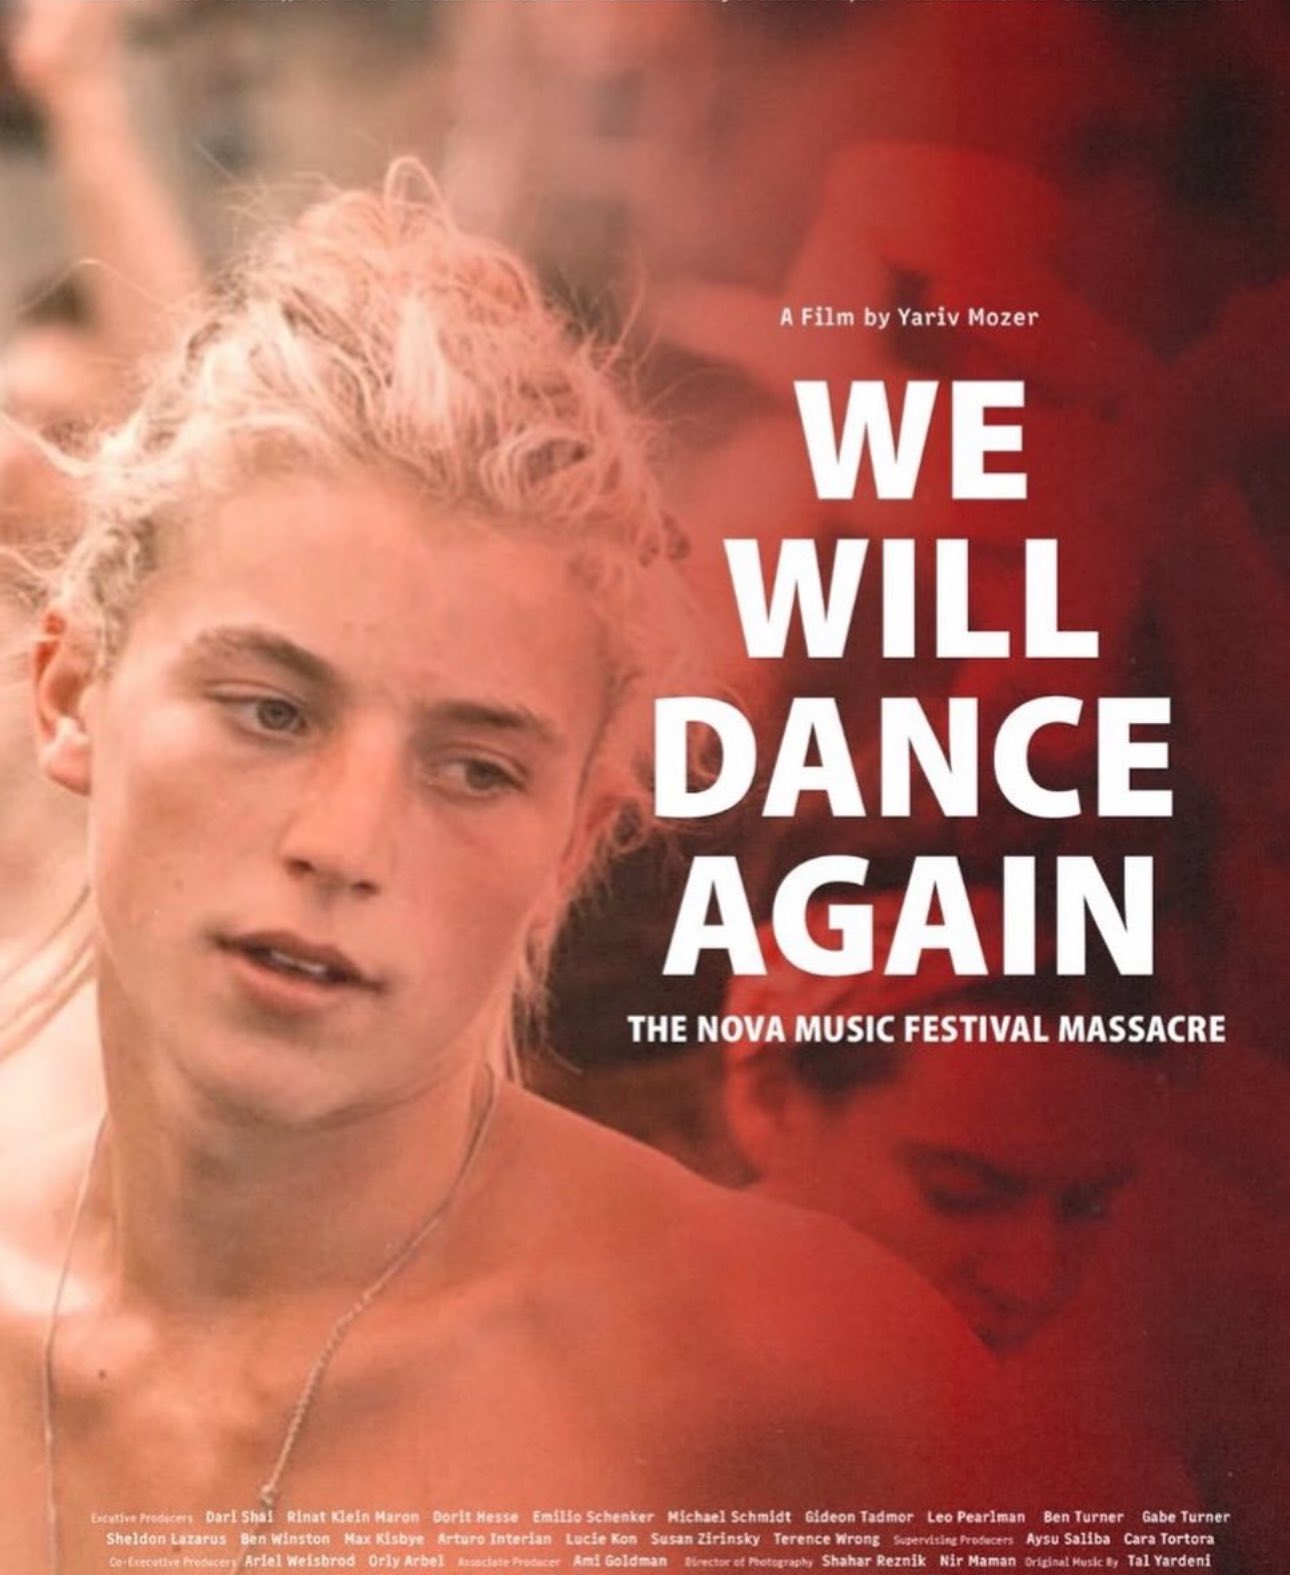 Paramount+ to Premiere "We Will Dance Again," A Documentary About Nova Music Festival Terror Attack